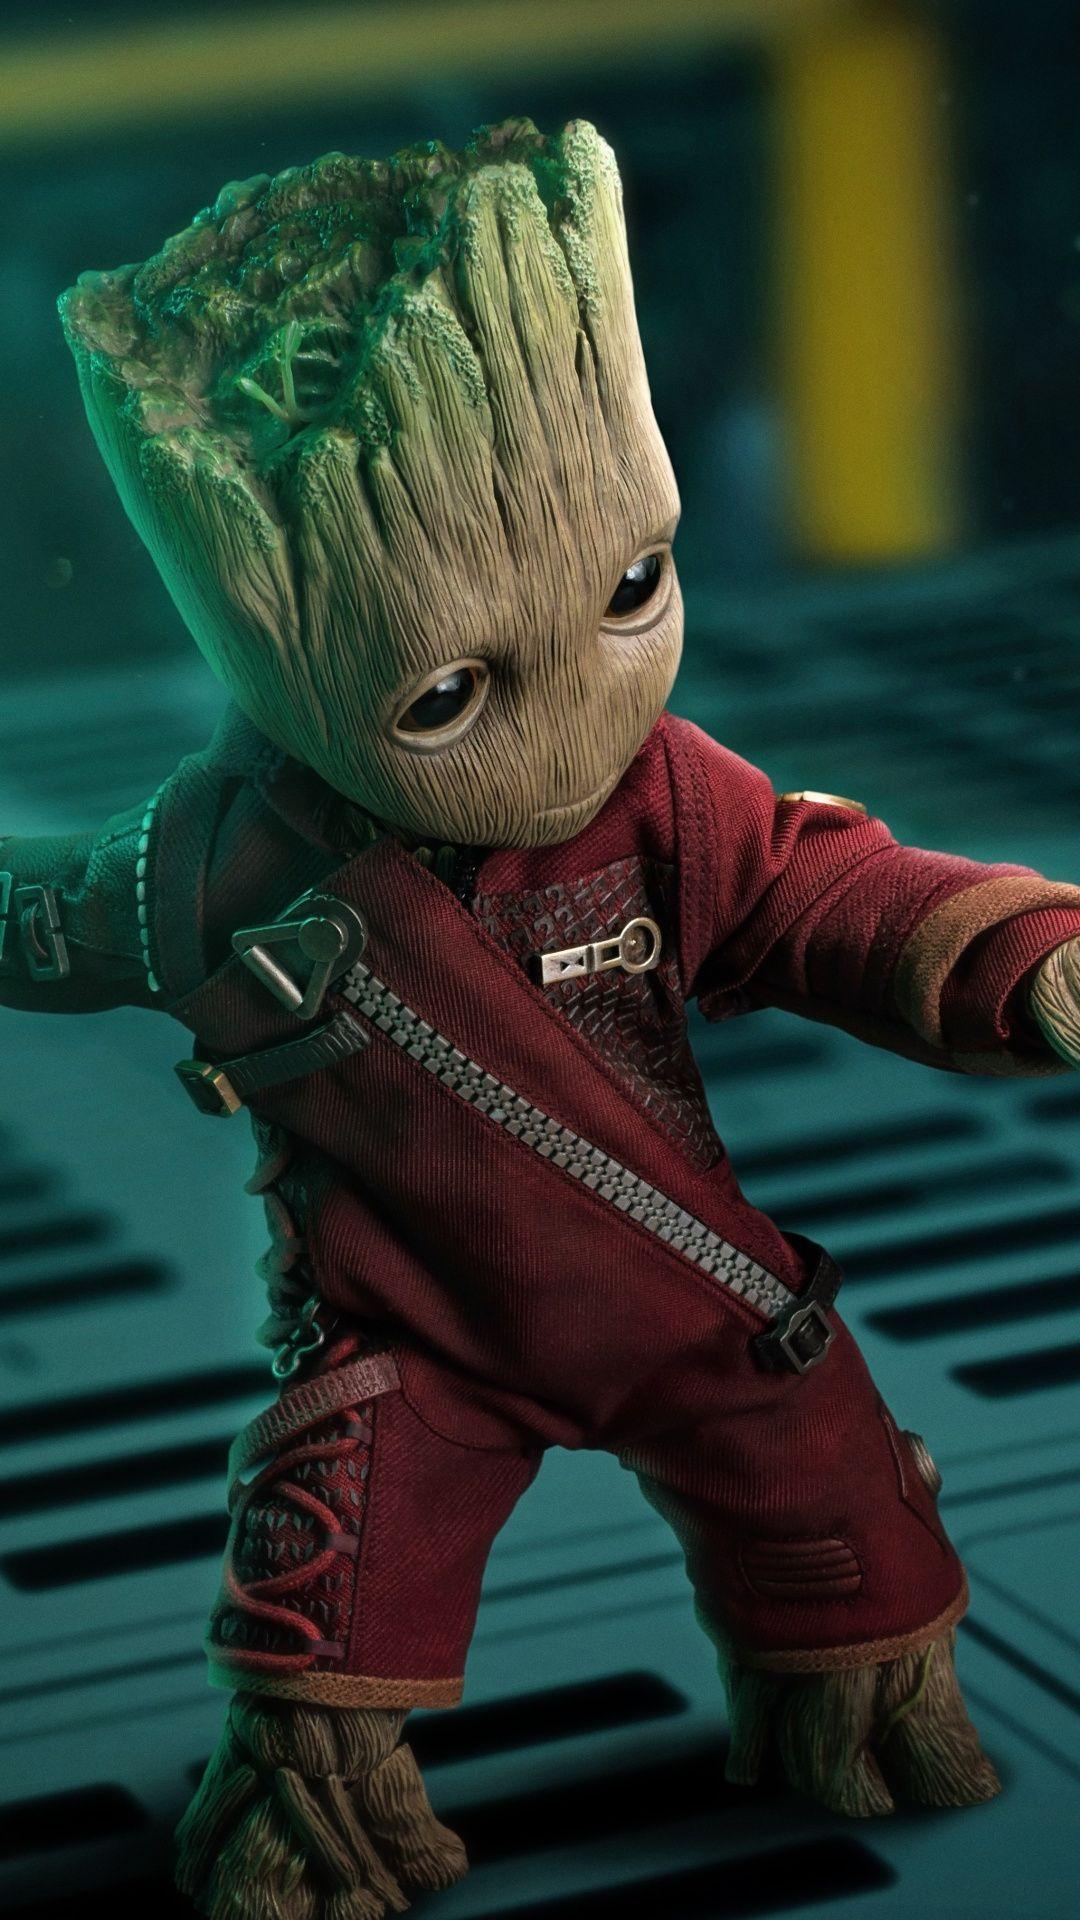 Baby groot, guardians of the galaxy, marvel, toy art wallpaper. Groot marvel, Baby groot, Groot